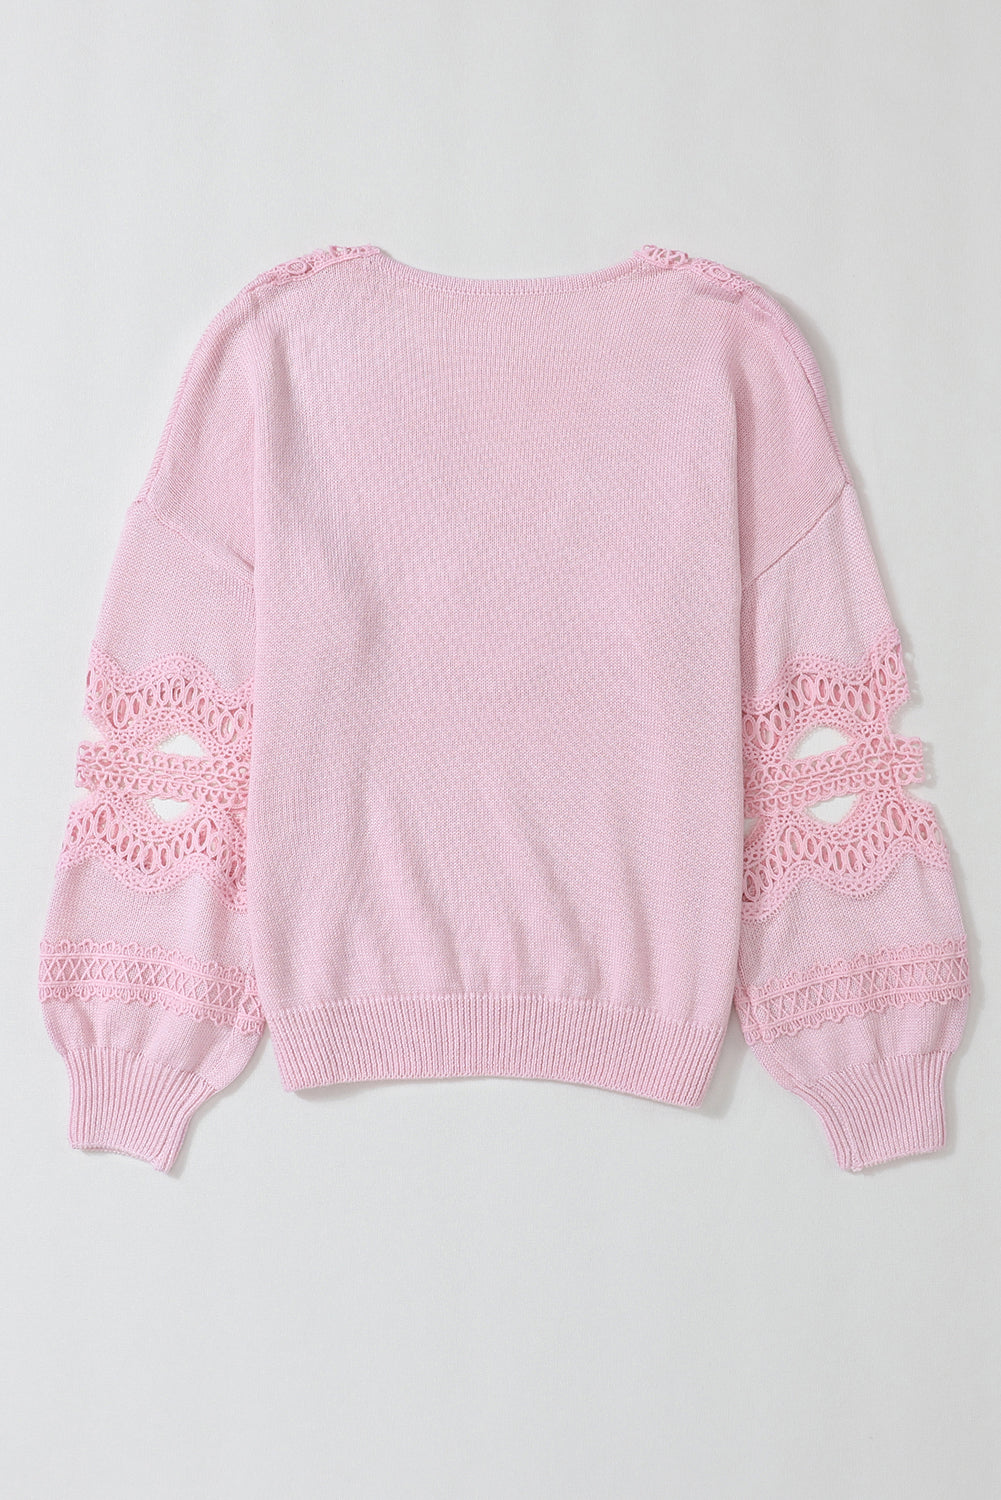 Pink Hollowed Lace Splicing V Neck Loose Sweater